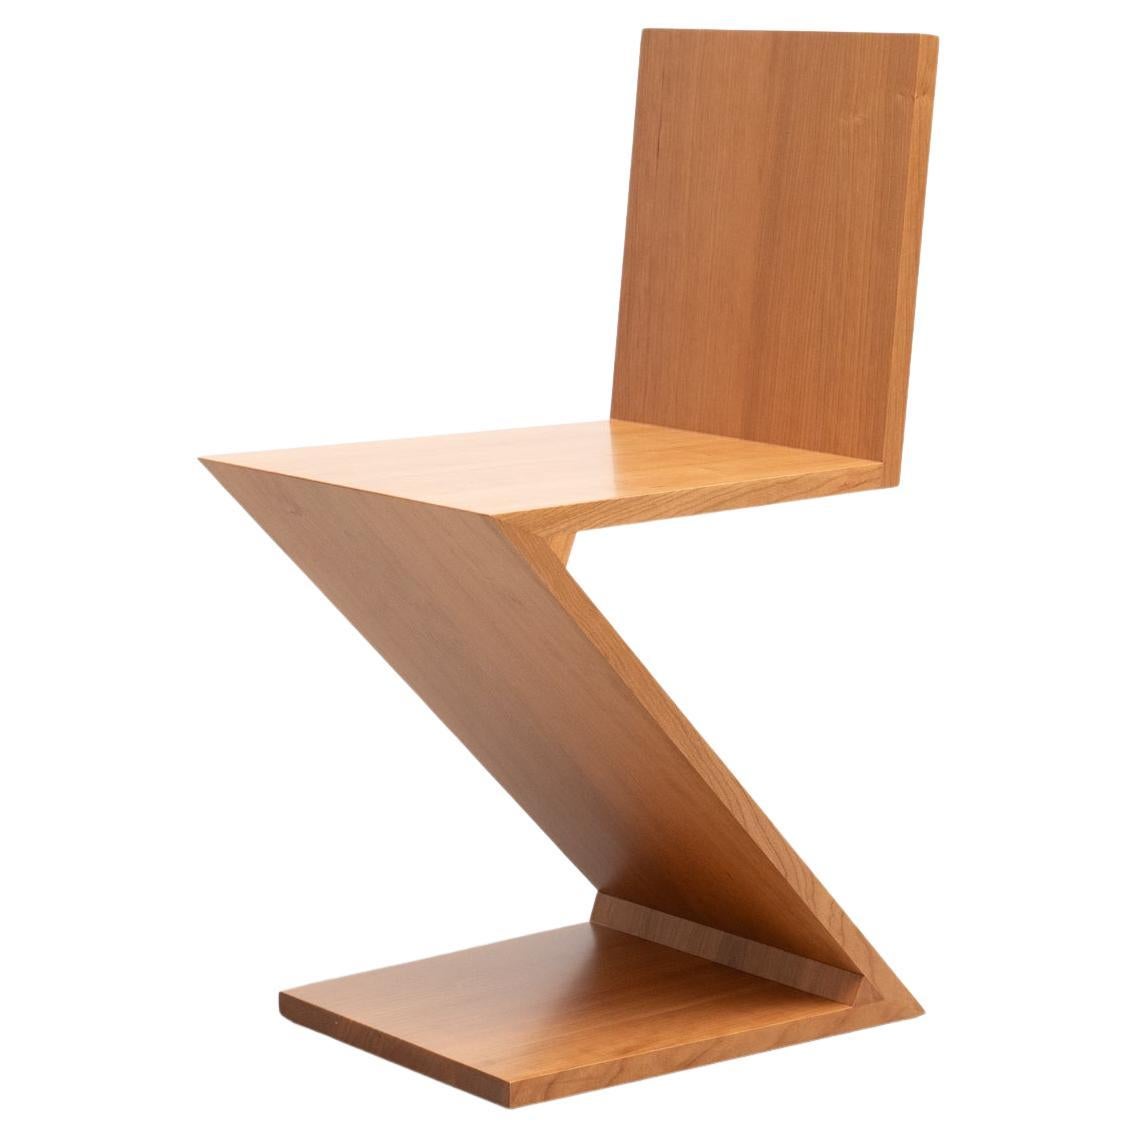 Chair designed by Gerrit Thomas Rietveld in 1934. 

Manufactured by Cassina in Italy, relaunched in 1973/2011.

Designed by Gerrit Rietveld, this chair provided an early example of a cantilevered seat, and is composed of four wood boards